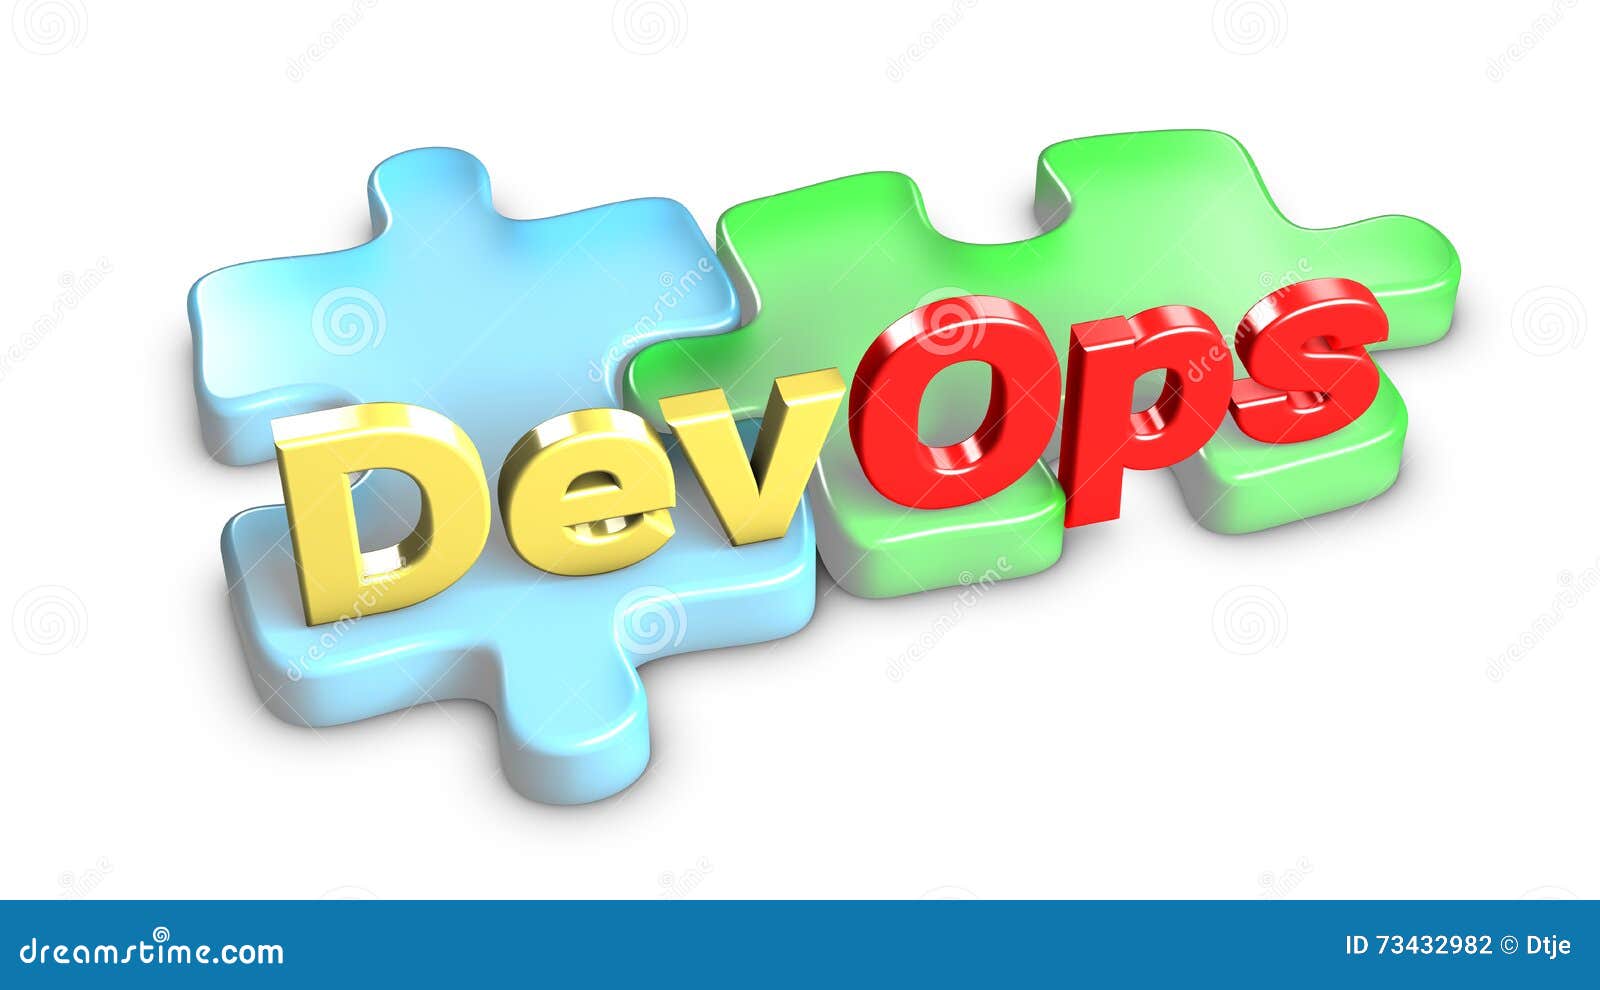 devops means development and operations. 3d rendering.